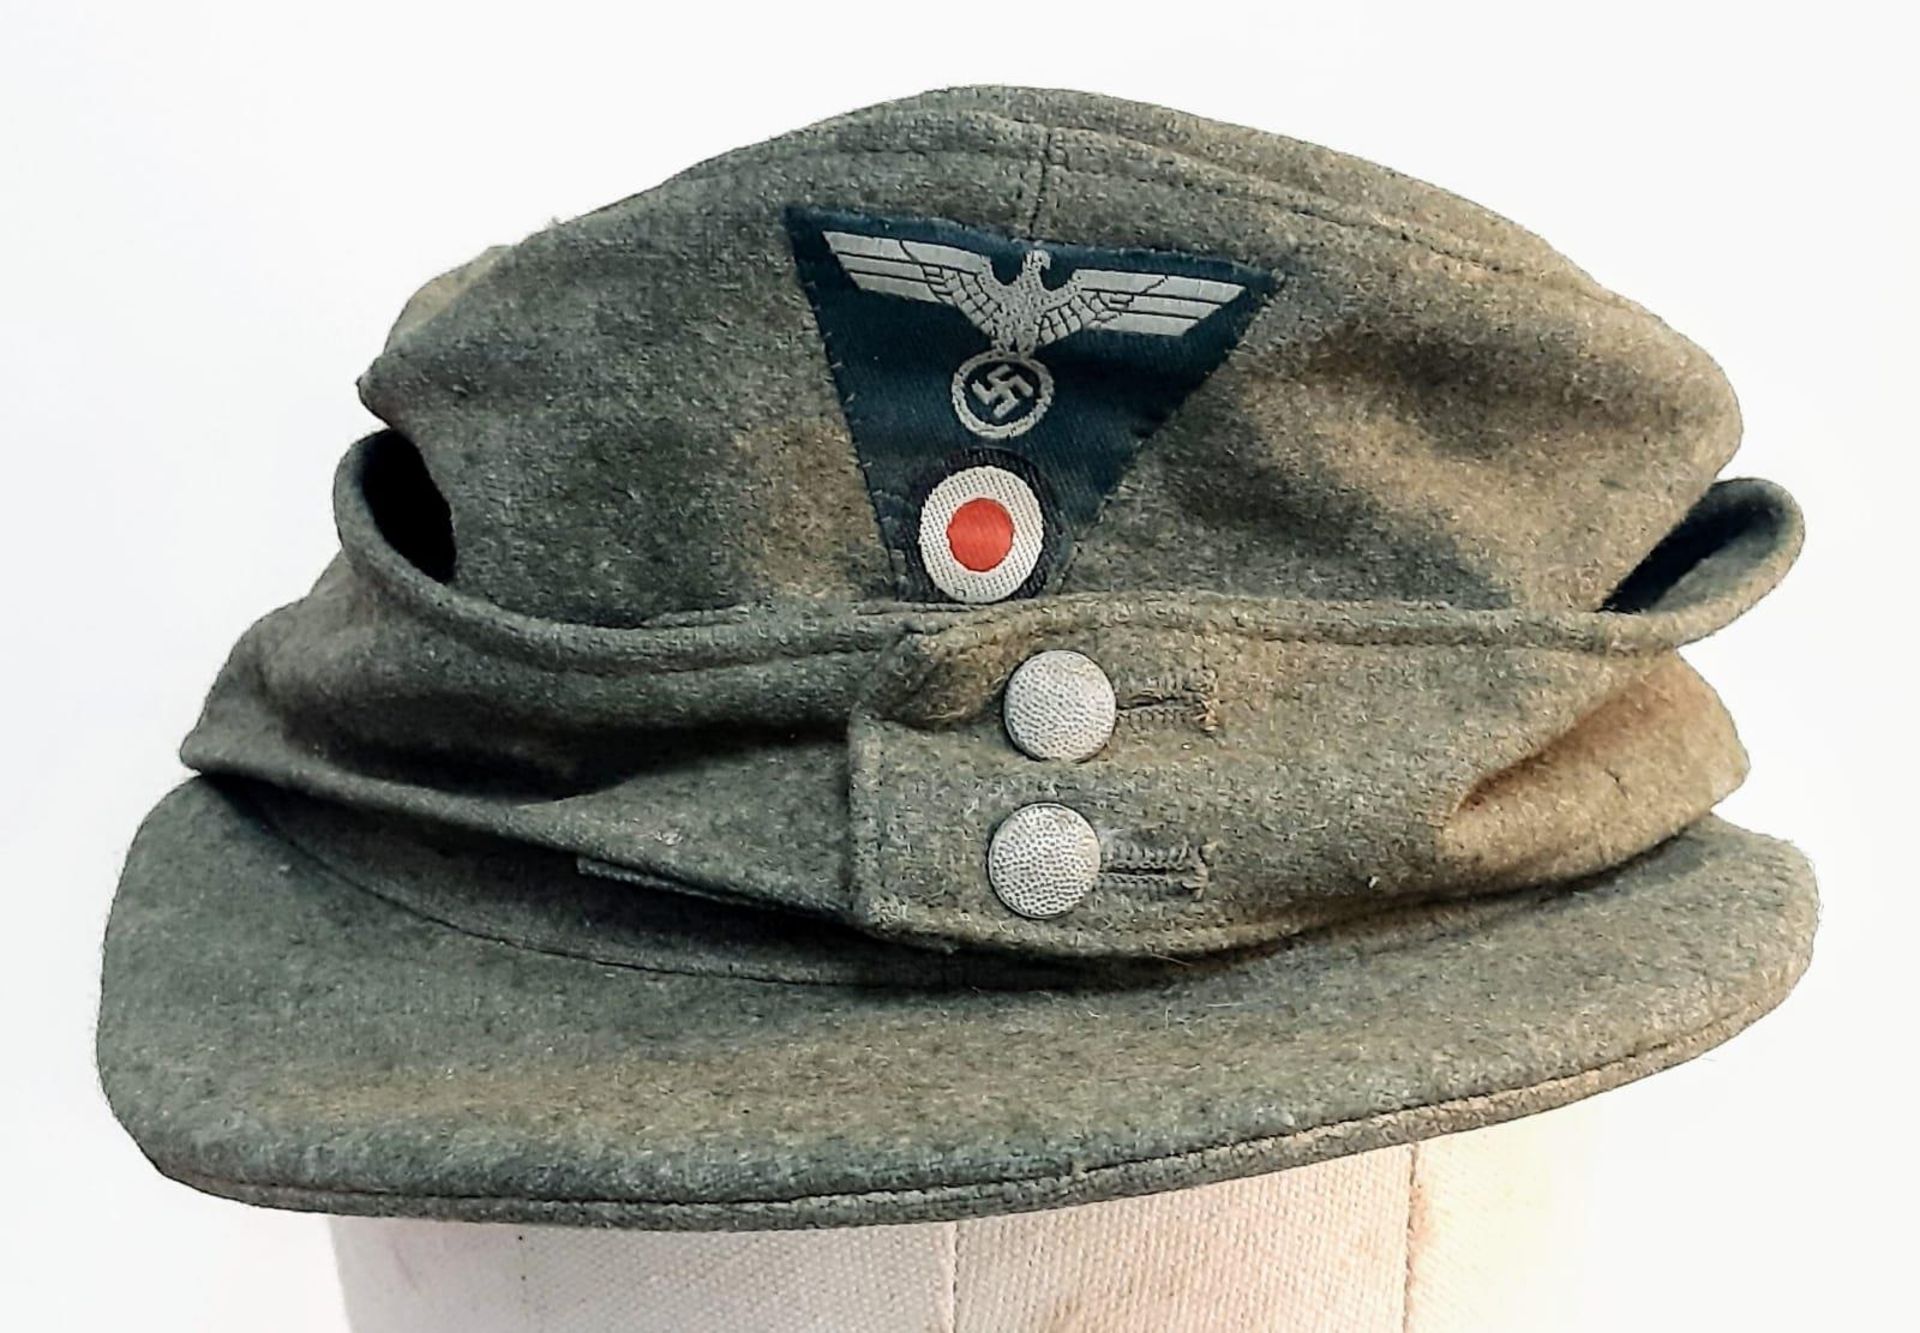 Reserve £375 21. WW2 German Heer (Army) M43 Cap with Jäger (light infantry mountain troops)